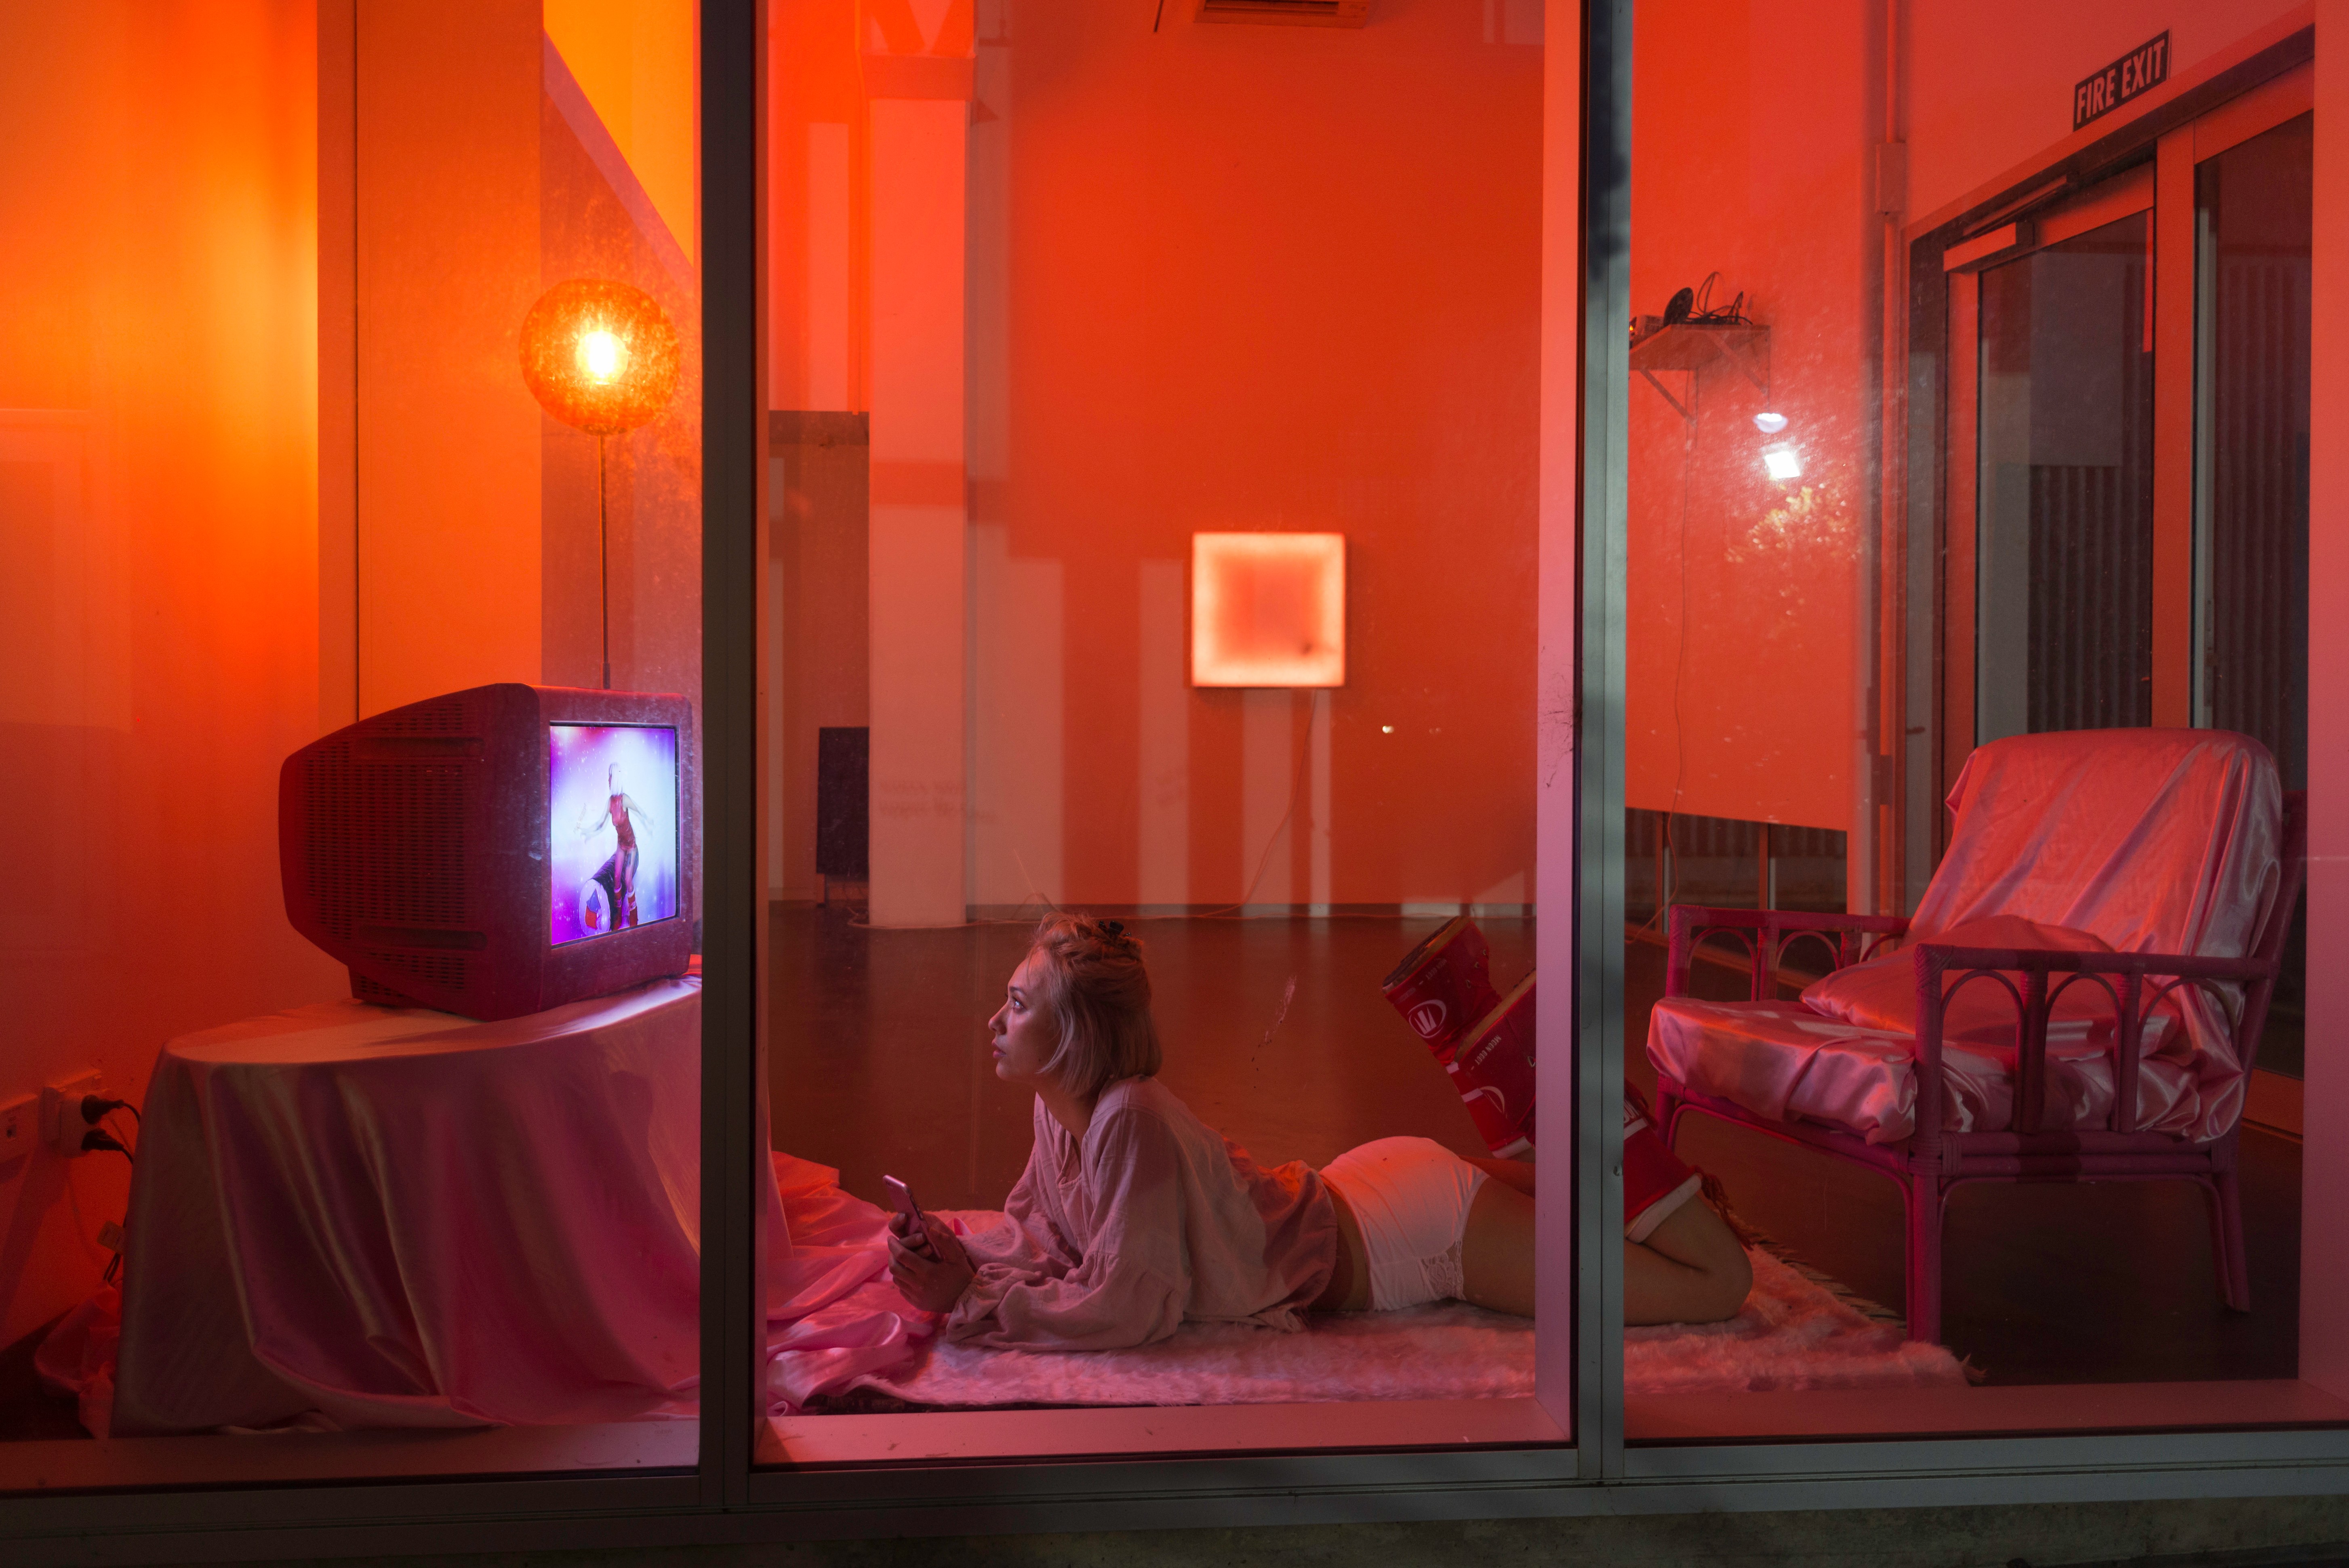 Bathed in orange light, Emiko Sheehan watches herself on a TV while lying on a rug.